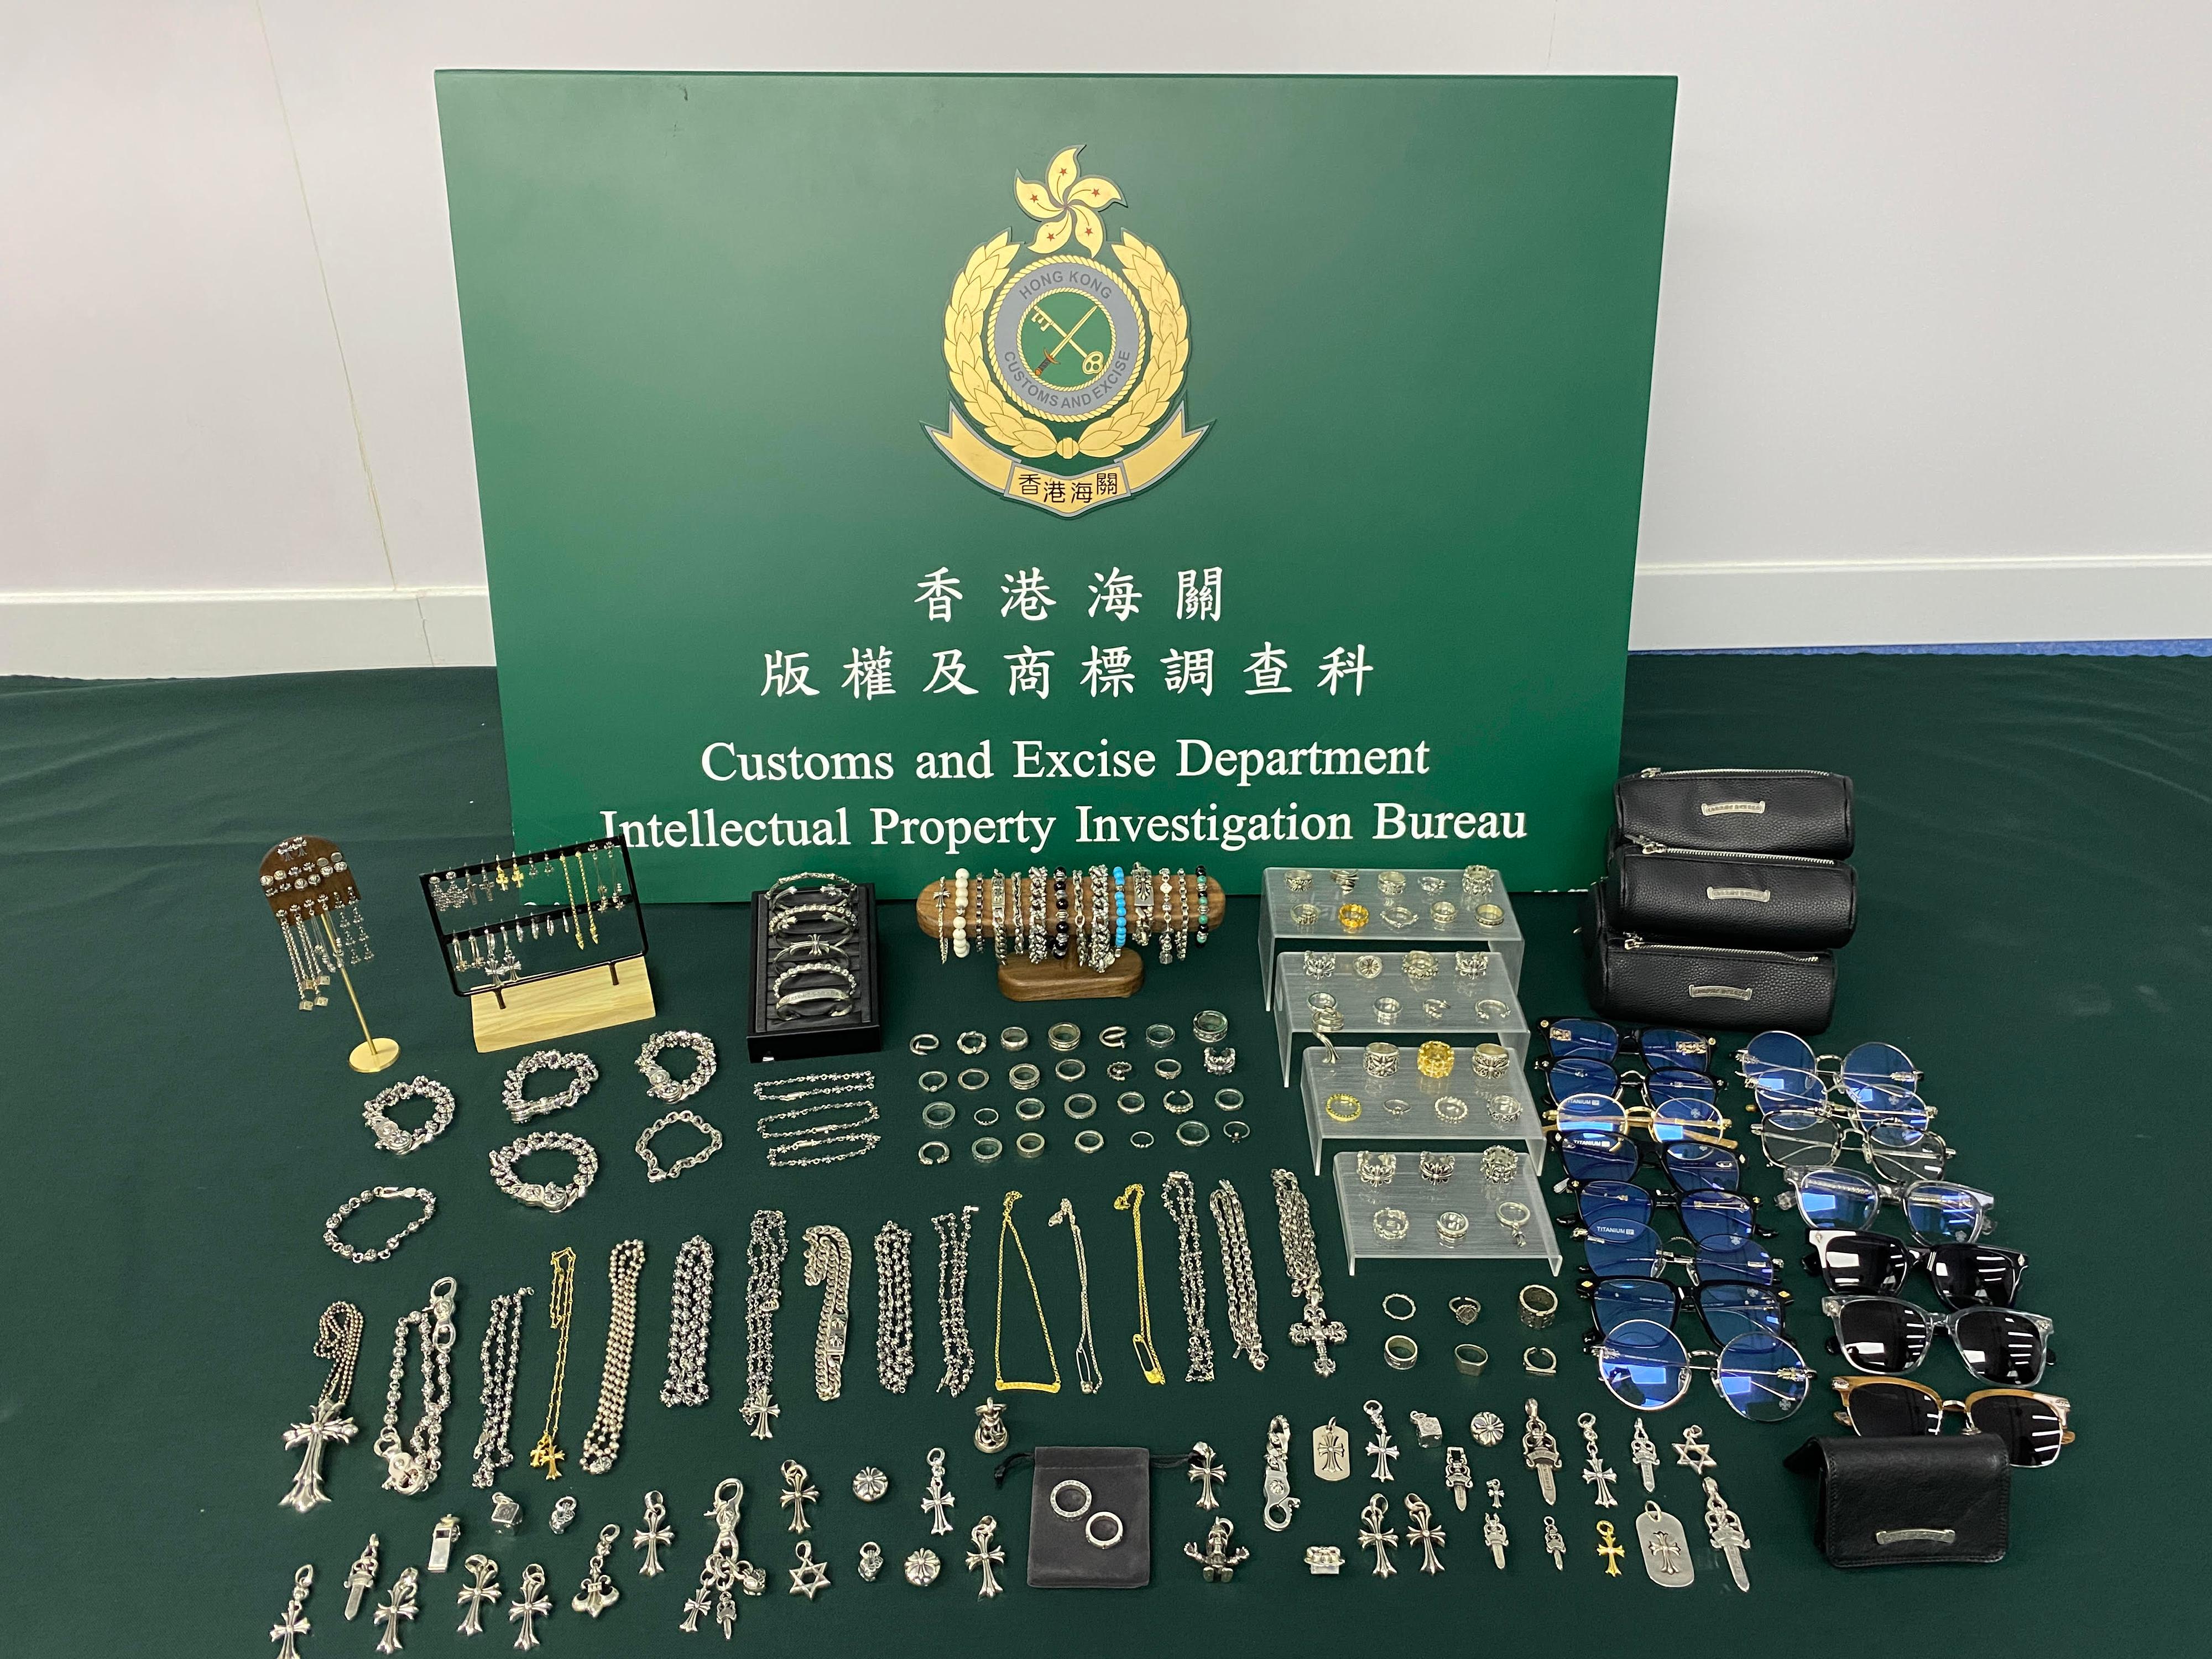 Hong Kong Customs yesterday (October 6) conducted an enforcement operation to combat the online sale of counterfeit accessories and seized about 240 suspected counterfeit products with an estimated market value of about $240,000 in a retail shop. Photo shows the suspected counterfeit accessories seized. 